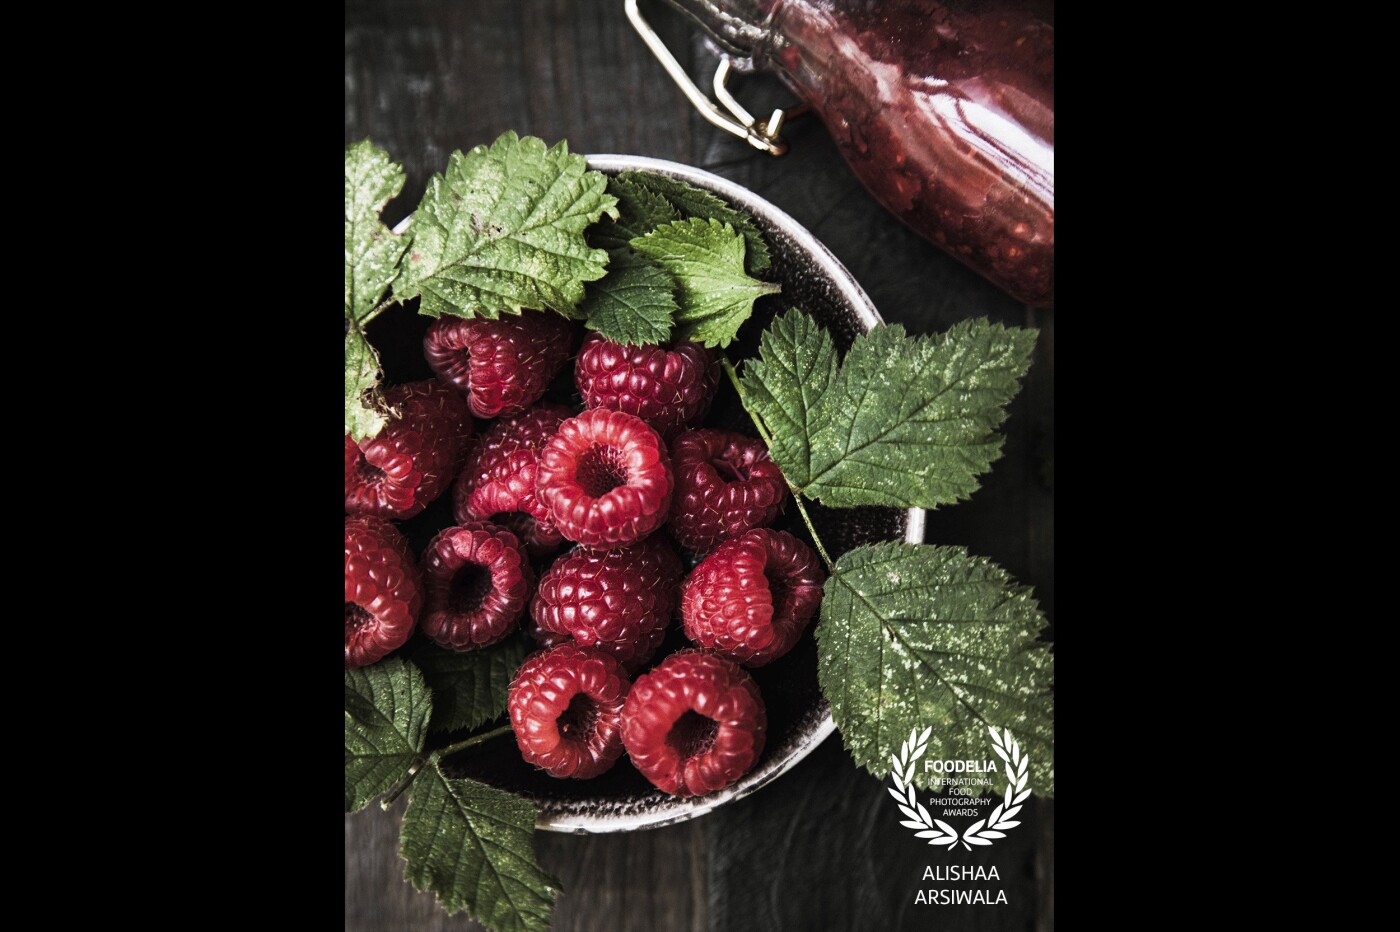 Dark and moody shot of the best - Raspberries!<br />
Love for berries and food photography! <br />
<br />
Instagram handle: lishcreative_studio